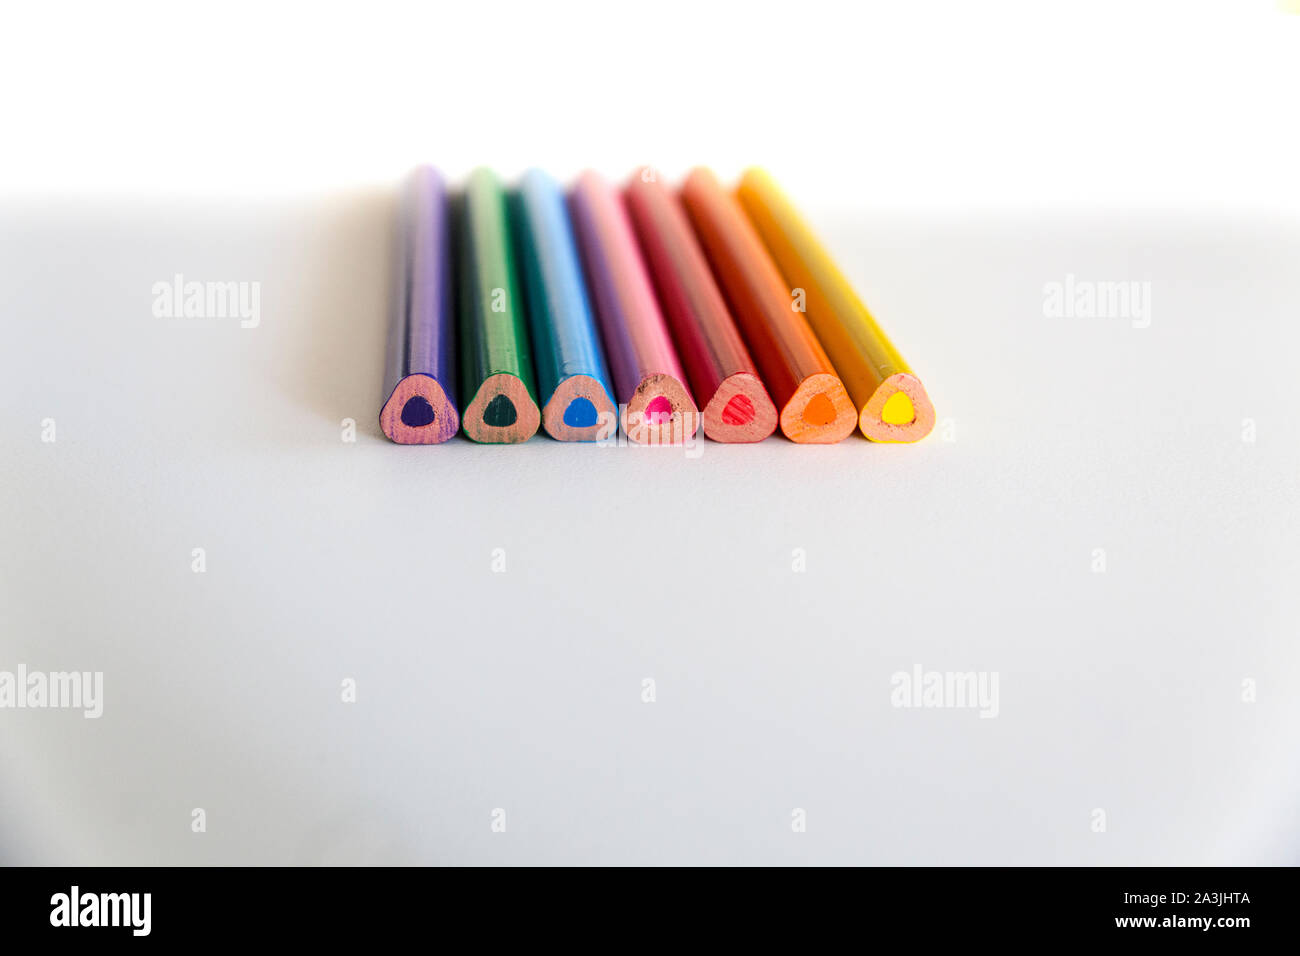 Close up of a number of colorful thick triangular prism crayons seen from their rear tips, arranged together on neutral white background with copy spa Stock Photo